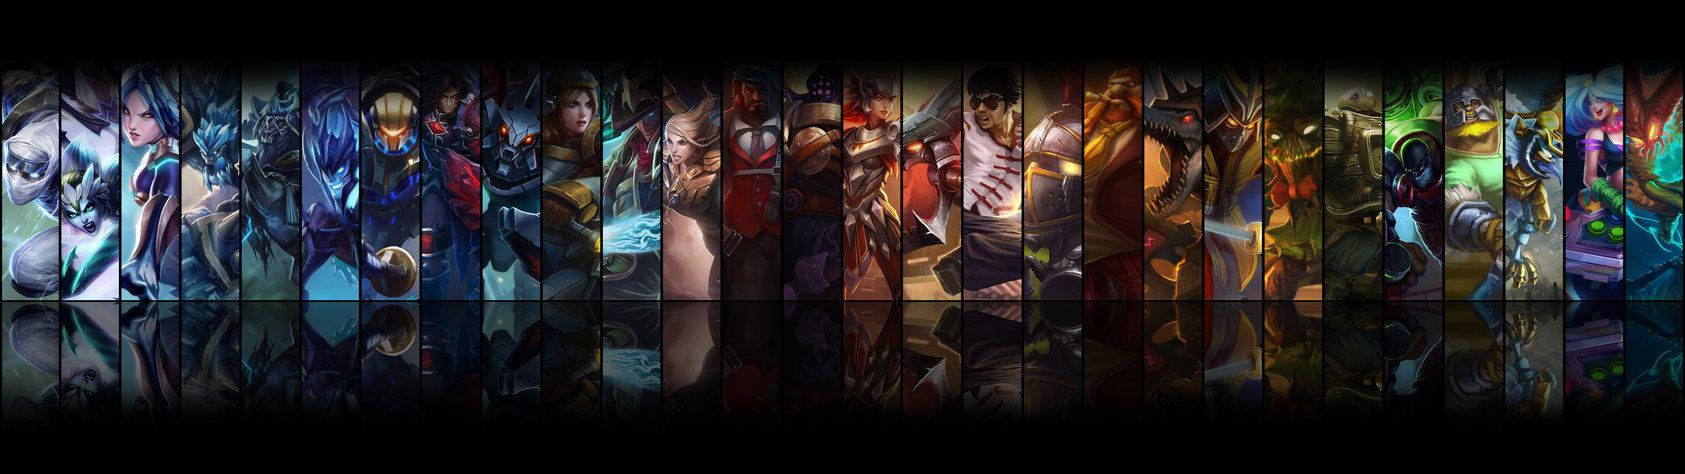 Enjoy The Vibrant Worlds Of League Of Legends With A Dual Screen Setup Wallpaper